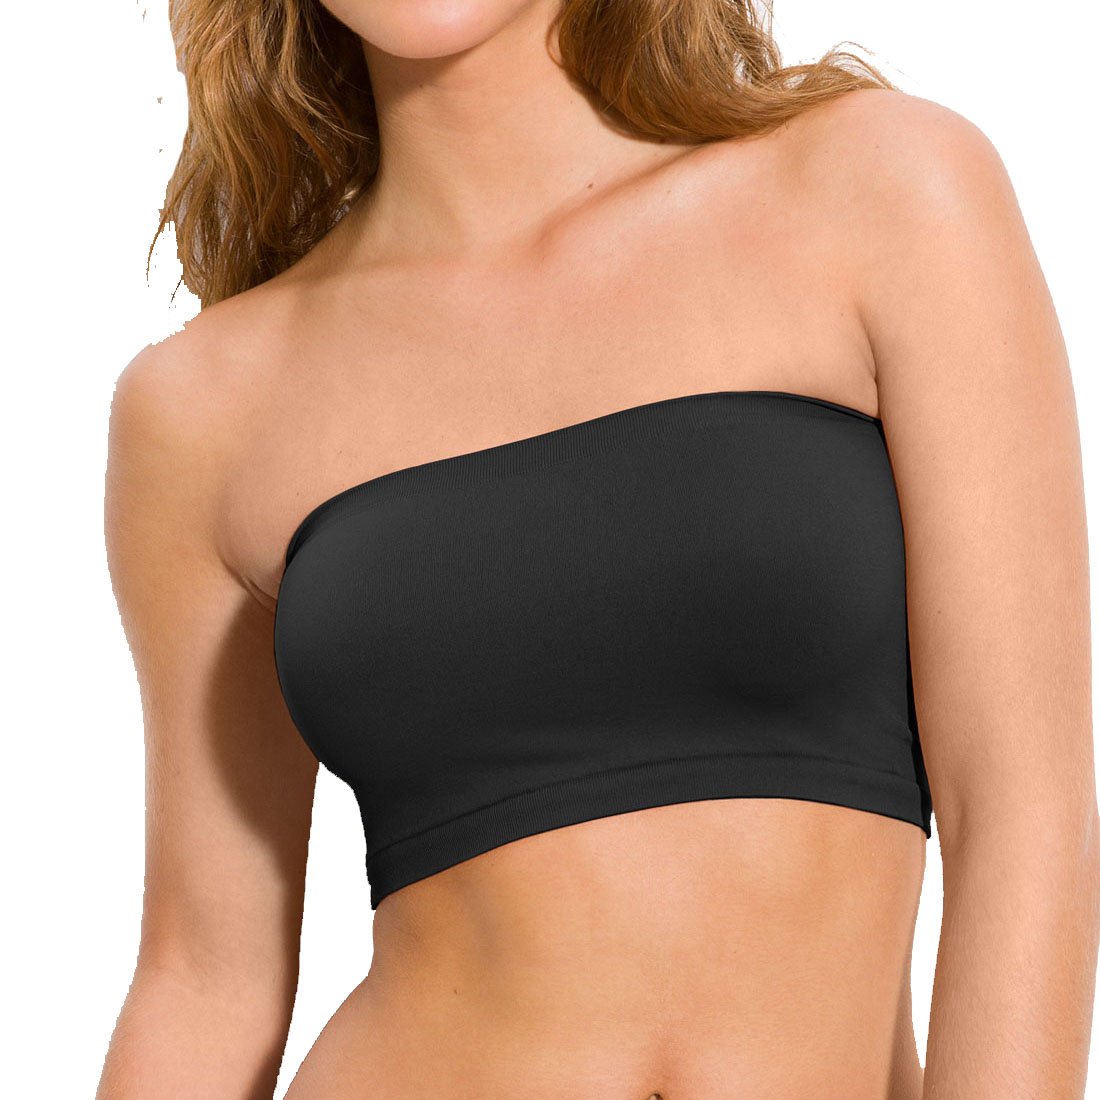 Hollywood Star Fashion Women's Basic Stretch Layering Seamless Tube Bra Cropped Top Casual Bandeau Juniors (One Size fits All, Mint)